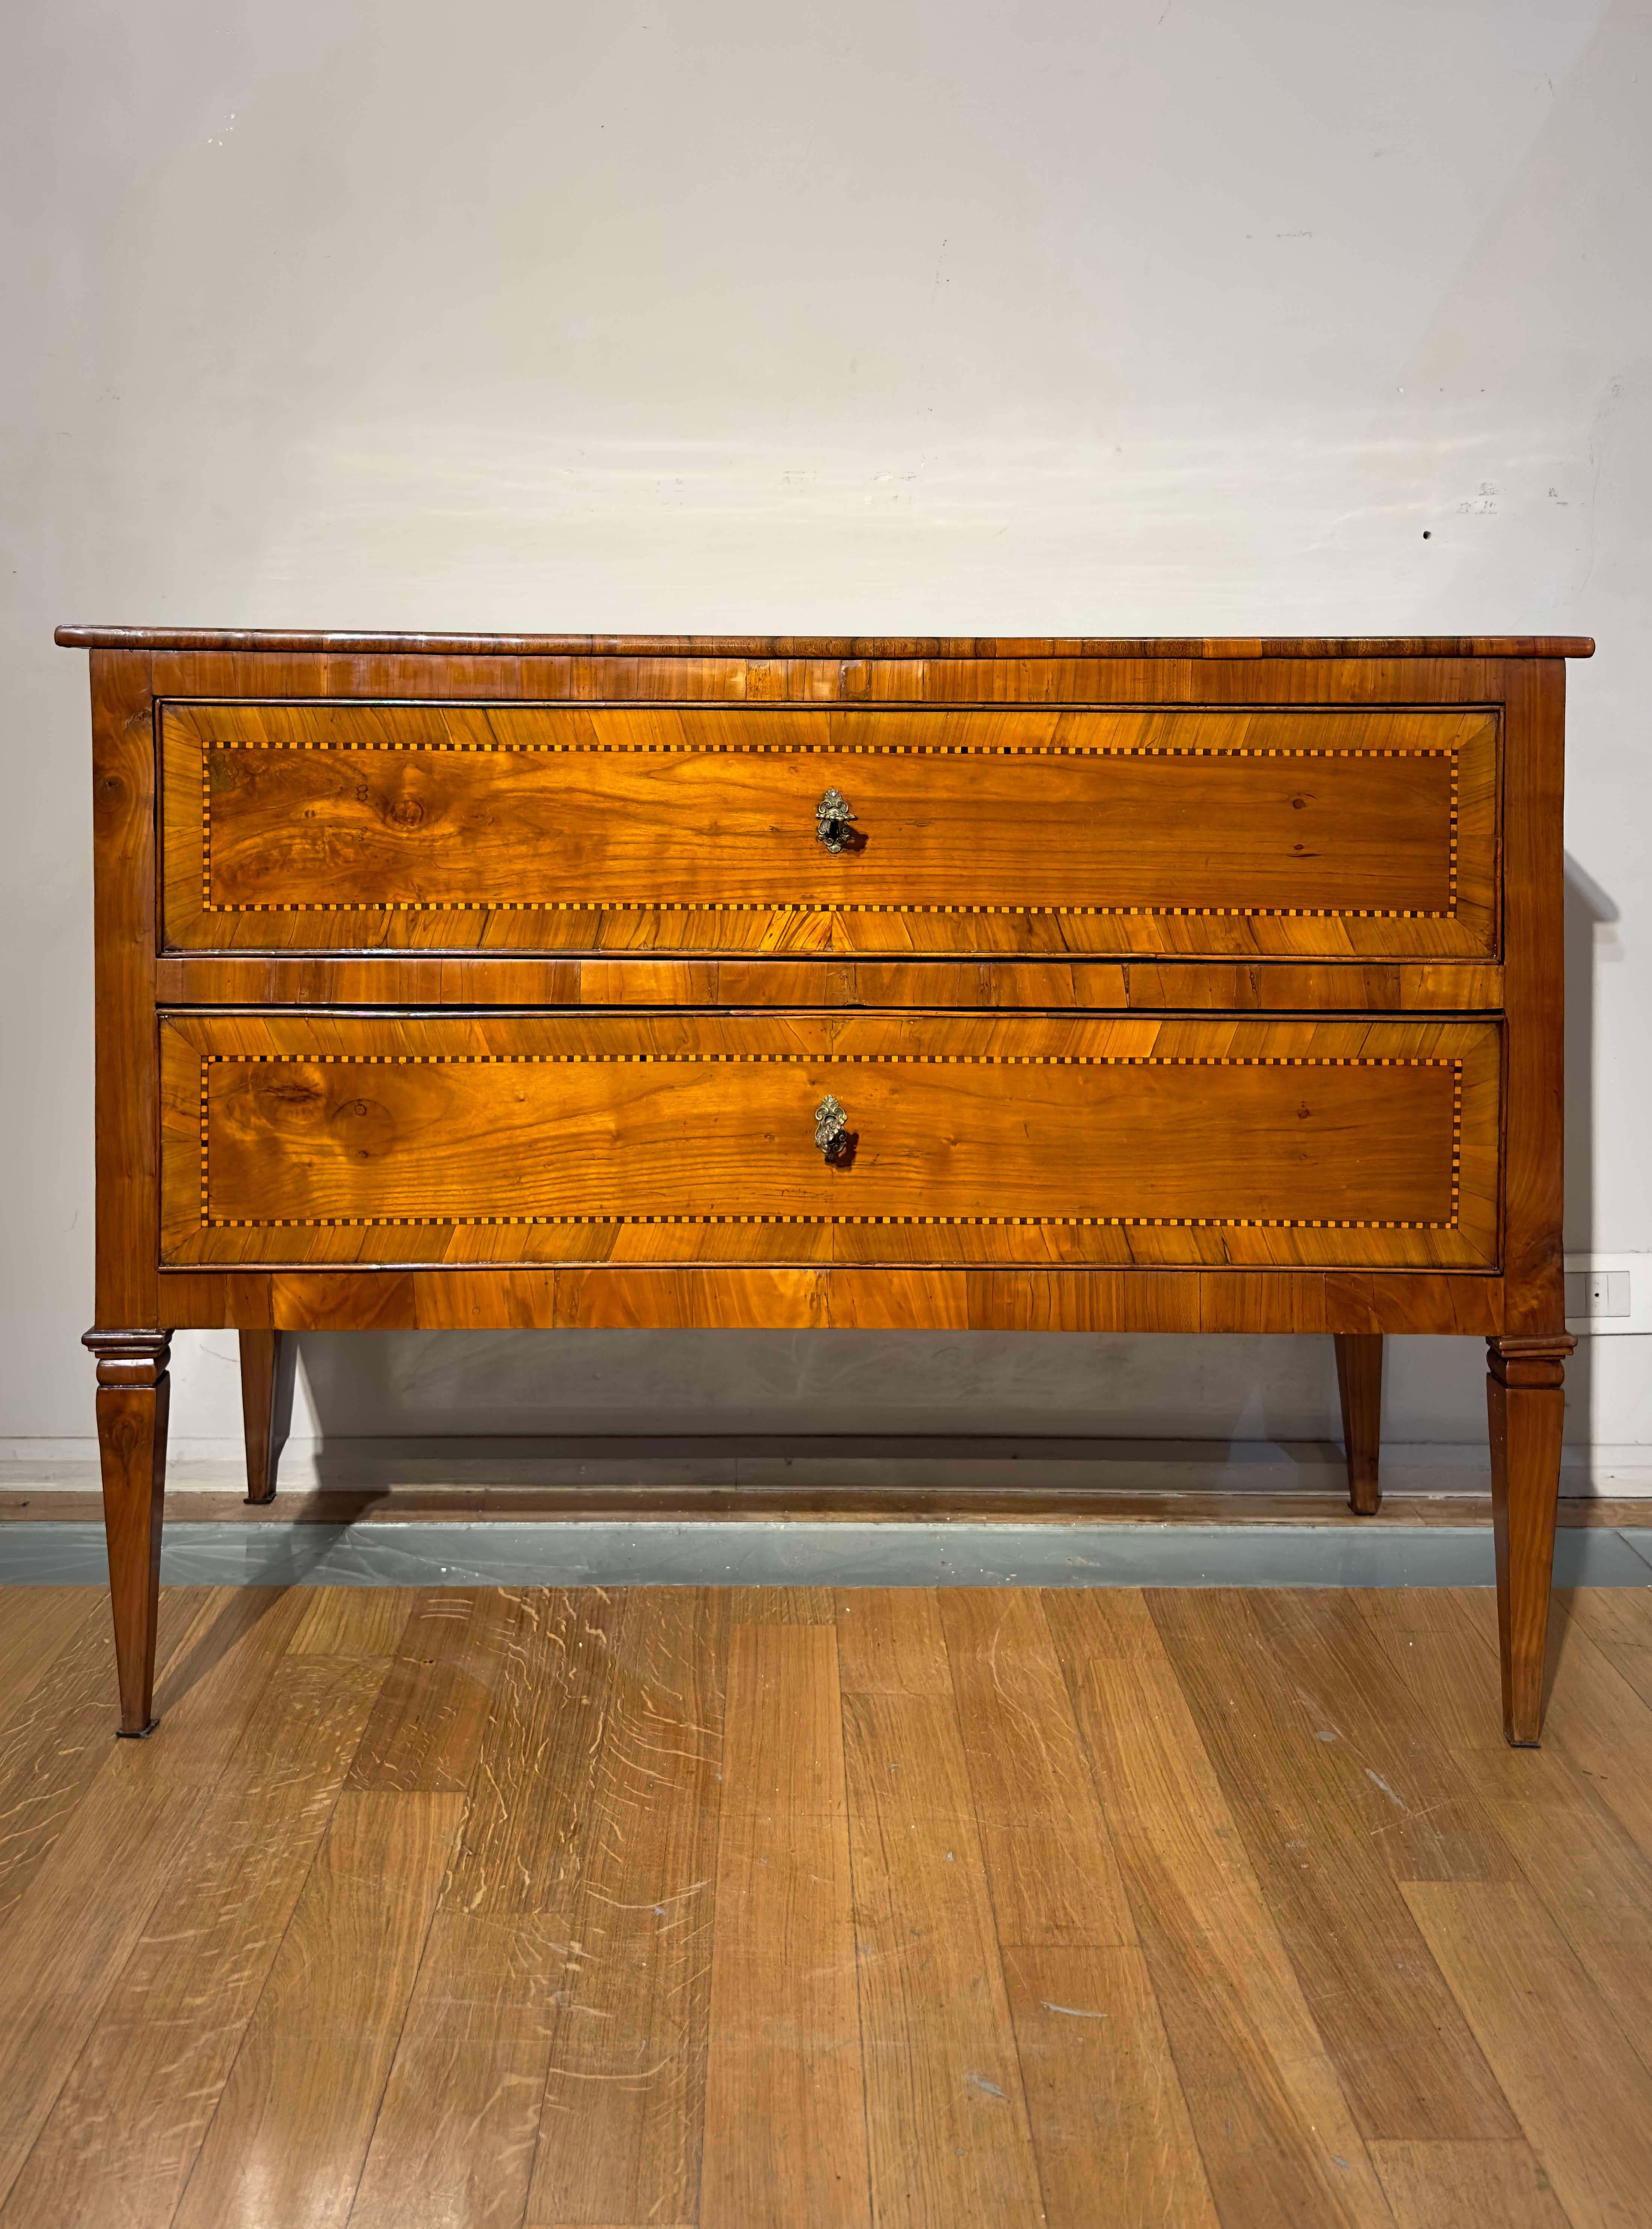 Neoclassical chest of drawers from the Louis XVI period, made of solid cherry wood with olive wood veneers. The elegant and refined design features a rectangular top supported by four truncated pyramid legs typical of the Louis XVI style. The piece